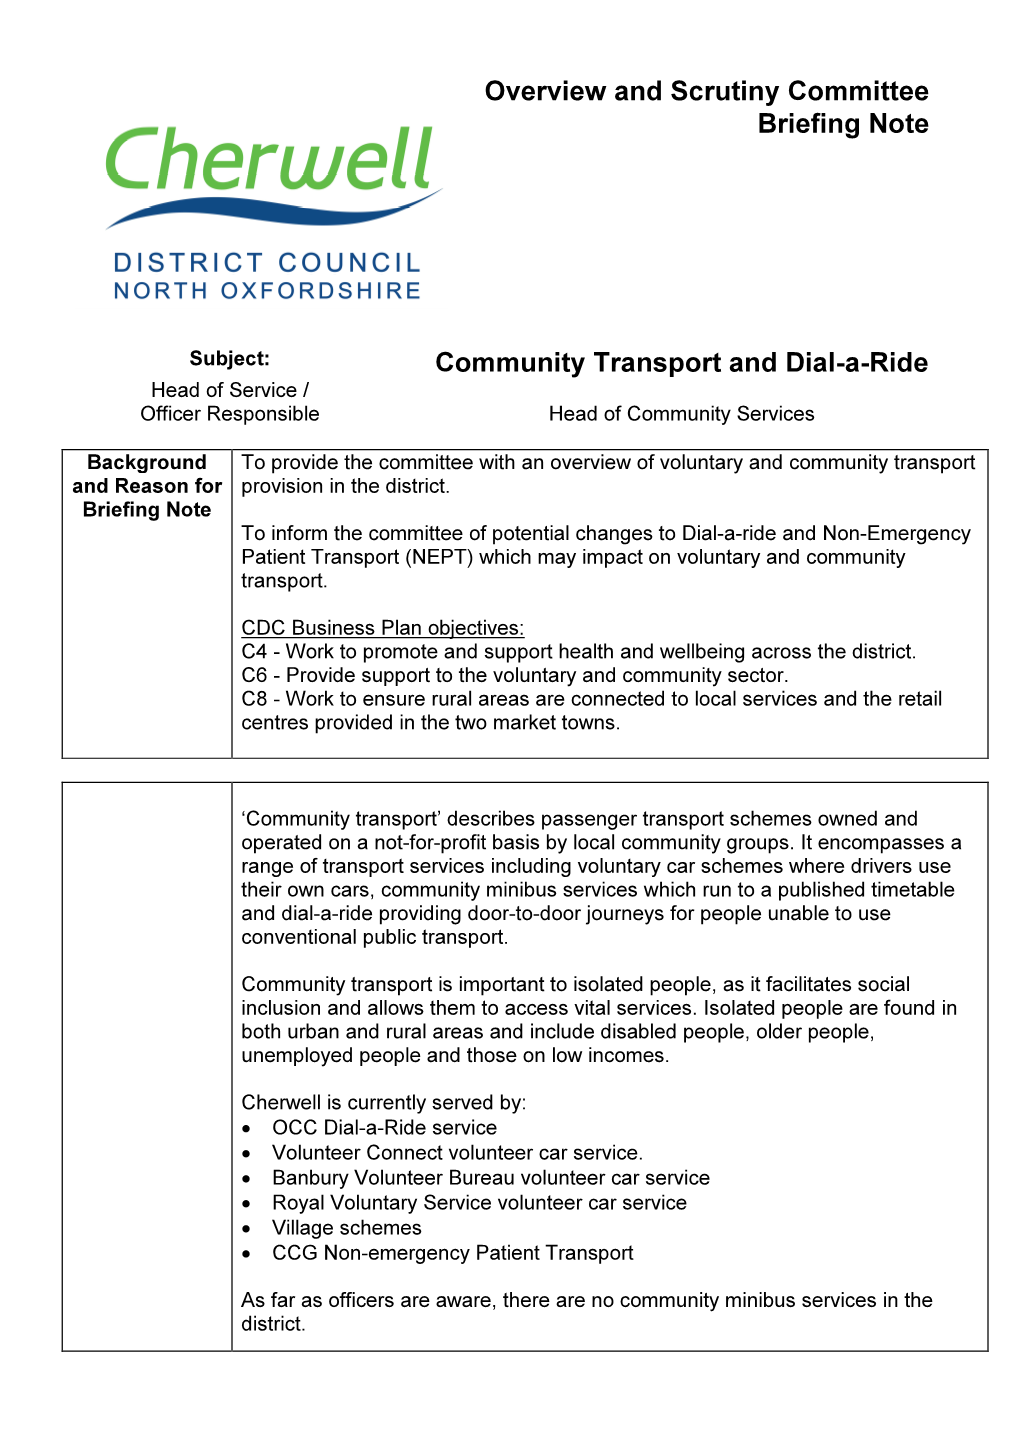 Community Transport and Dial-A-Ride Overview and Scrutiny Committee Briefing Note